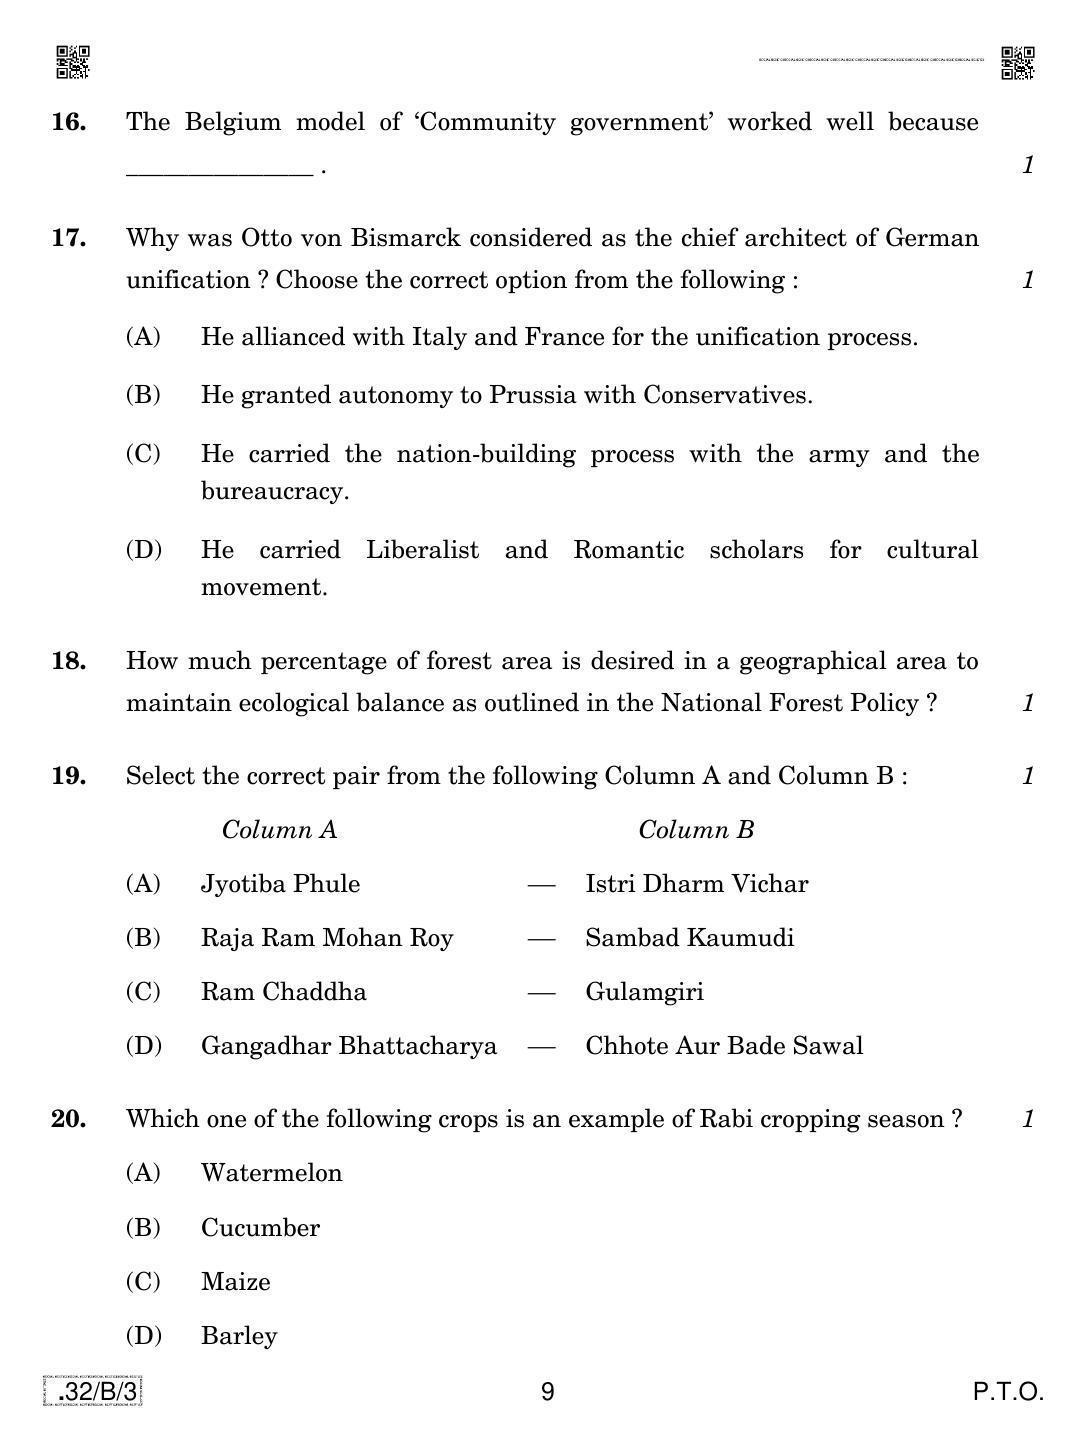 CBSE Class 10 32-C-3 Social Science 2020 Compartment Question Paper - Page 9